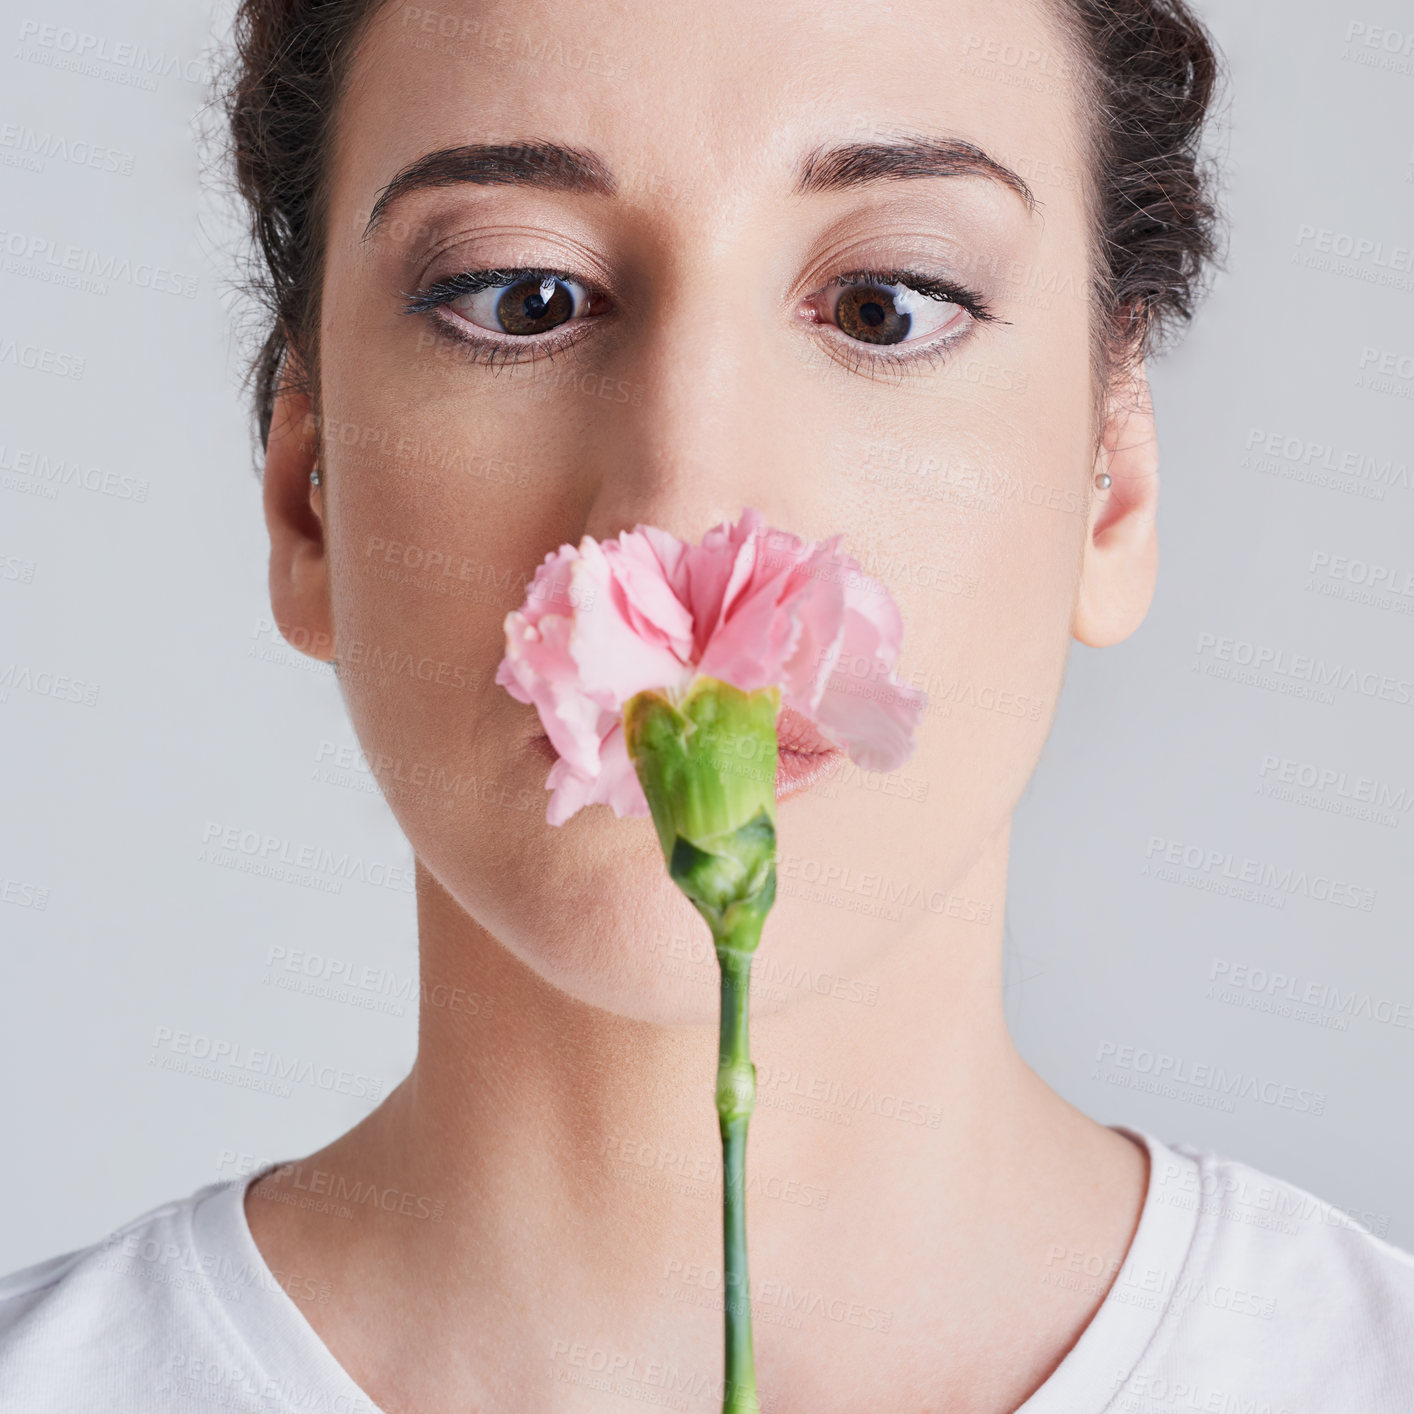 Buy stock photo Studio shot of a beautiful young woman smelling a pink flower against a grey background